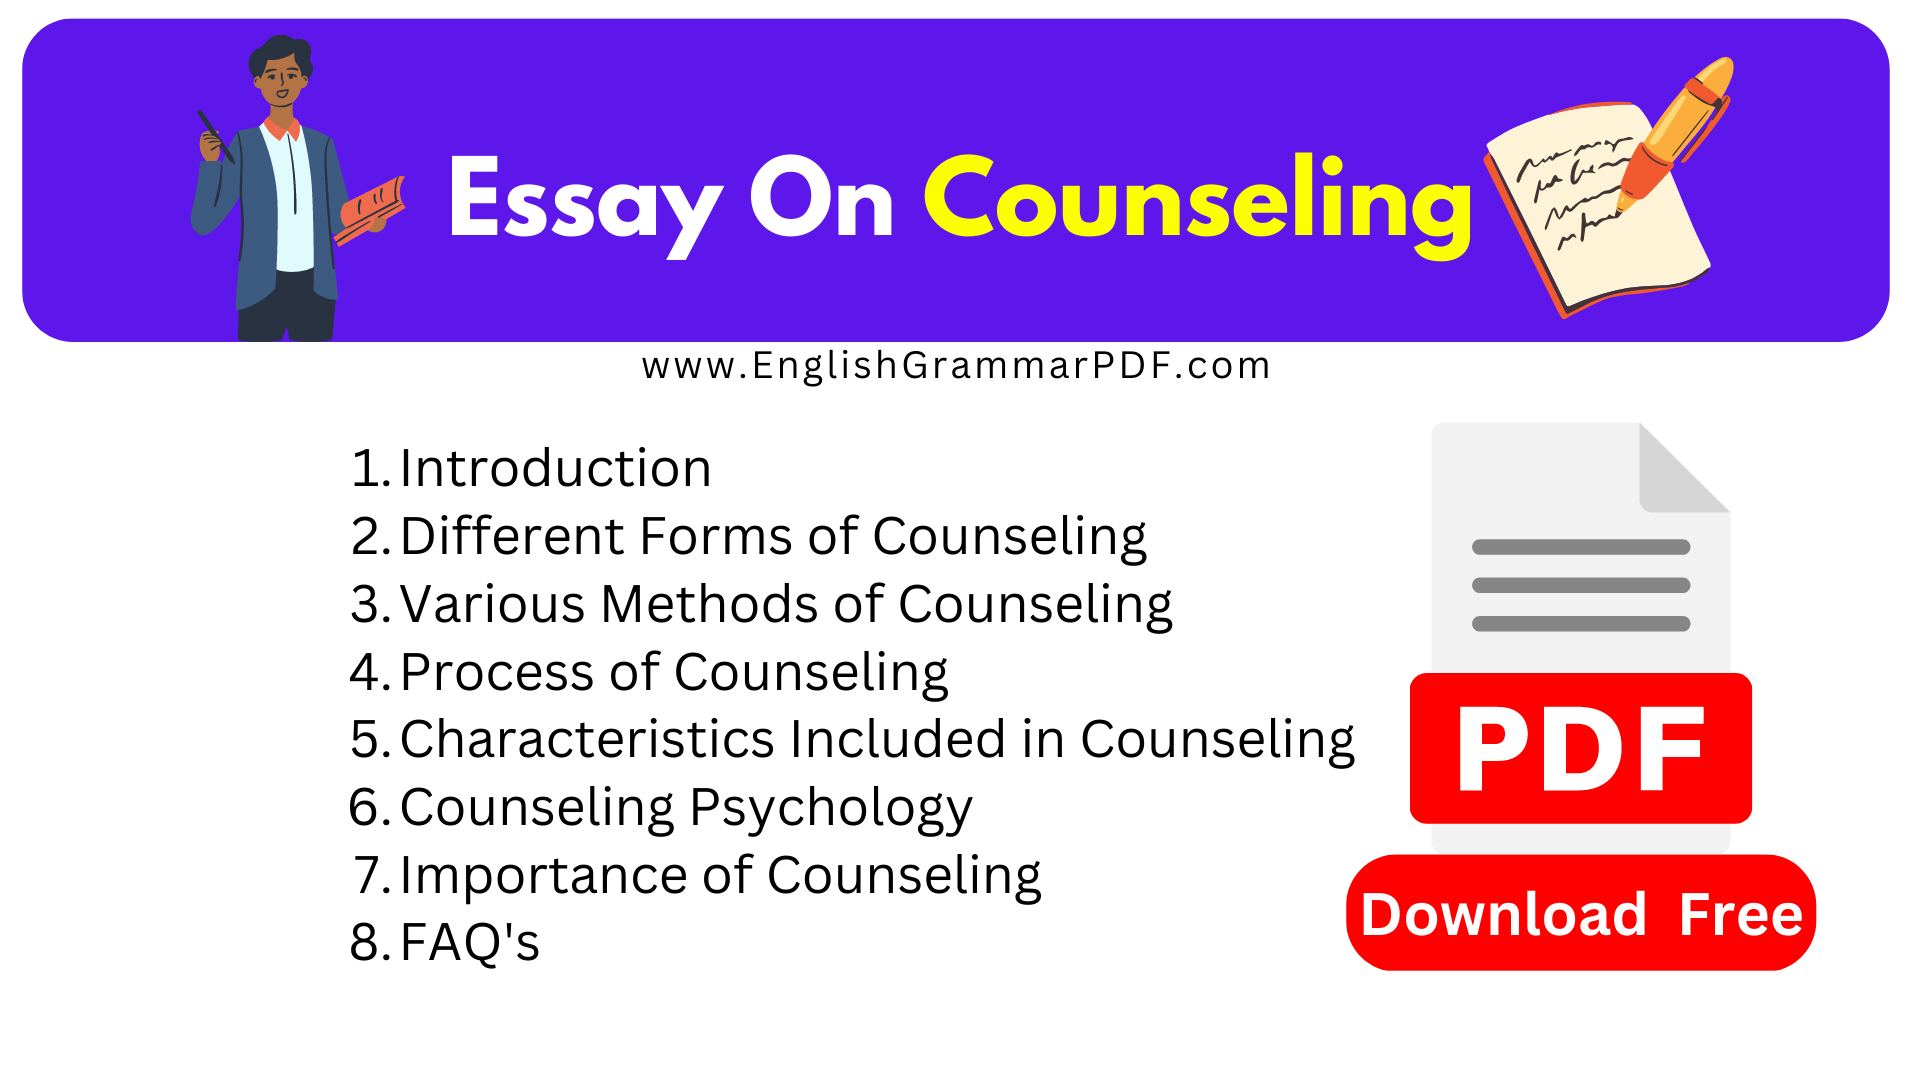 Essay On Counseling